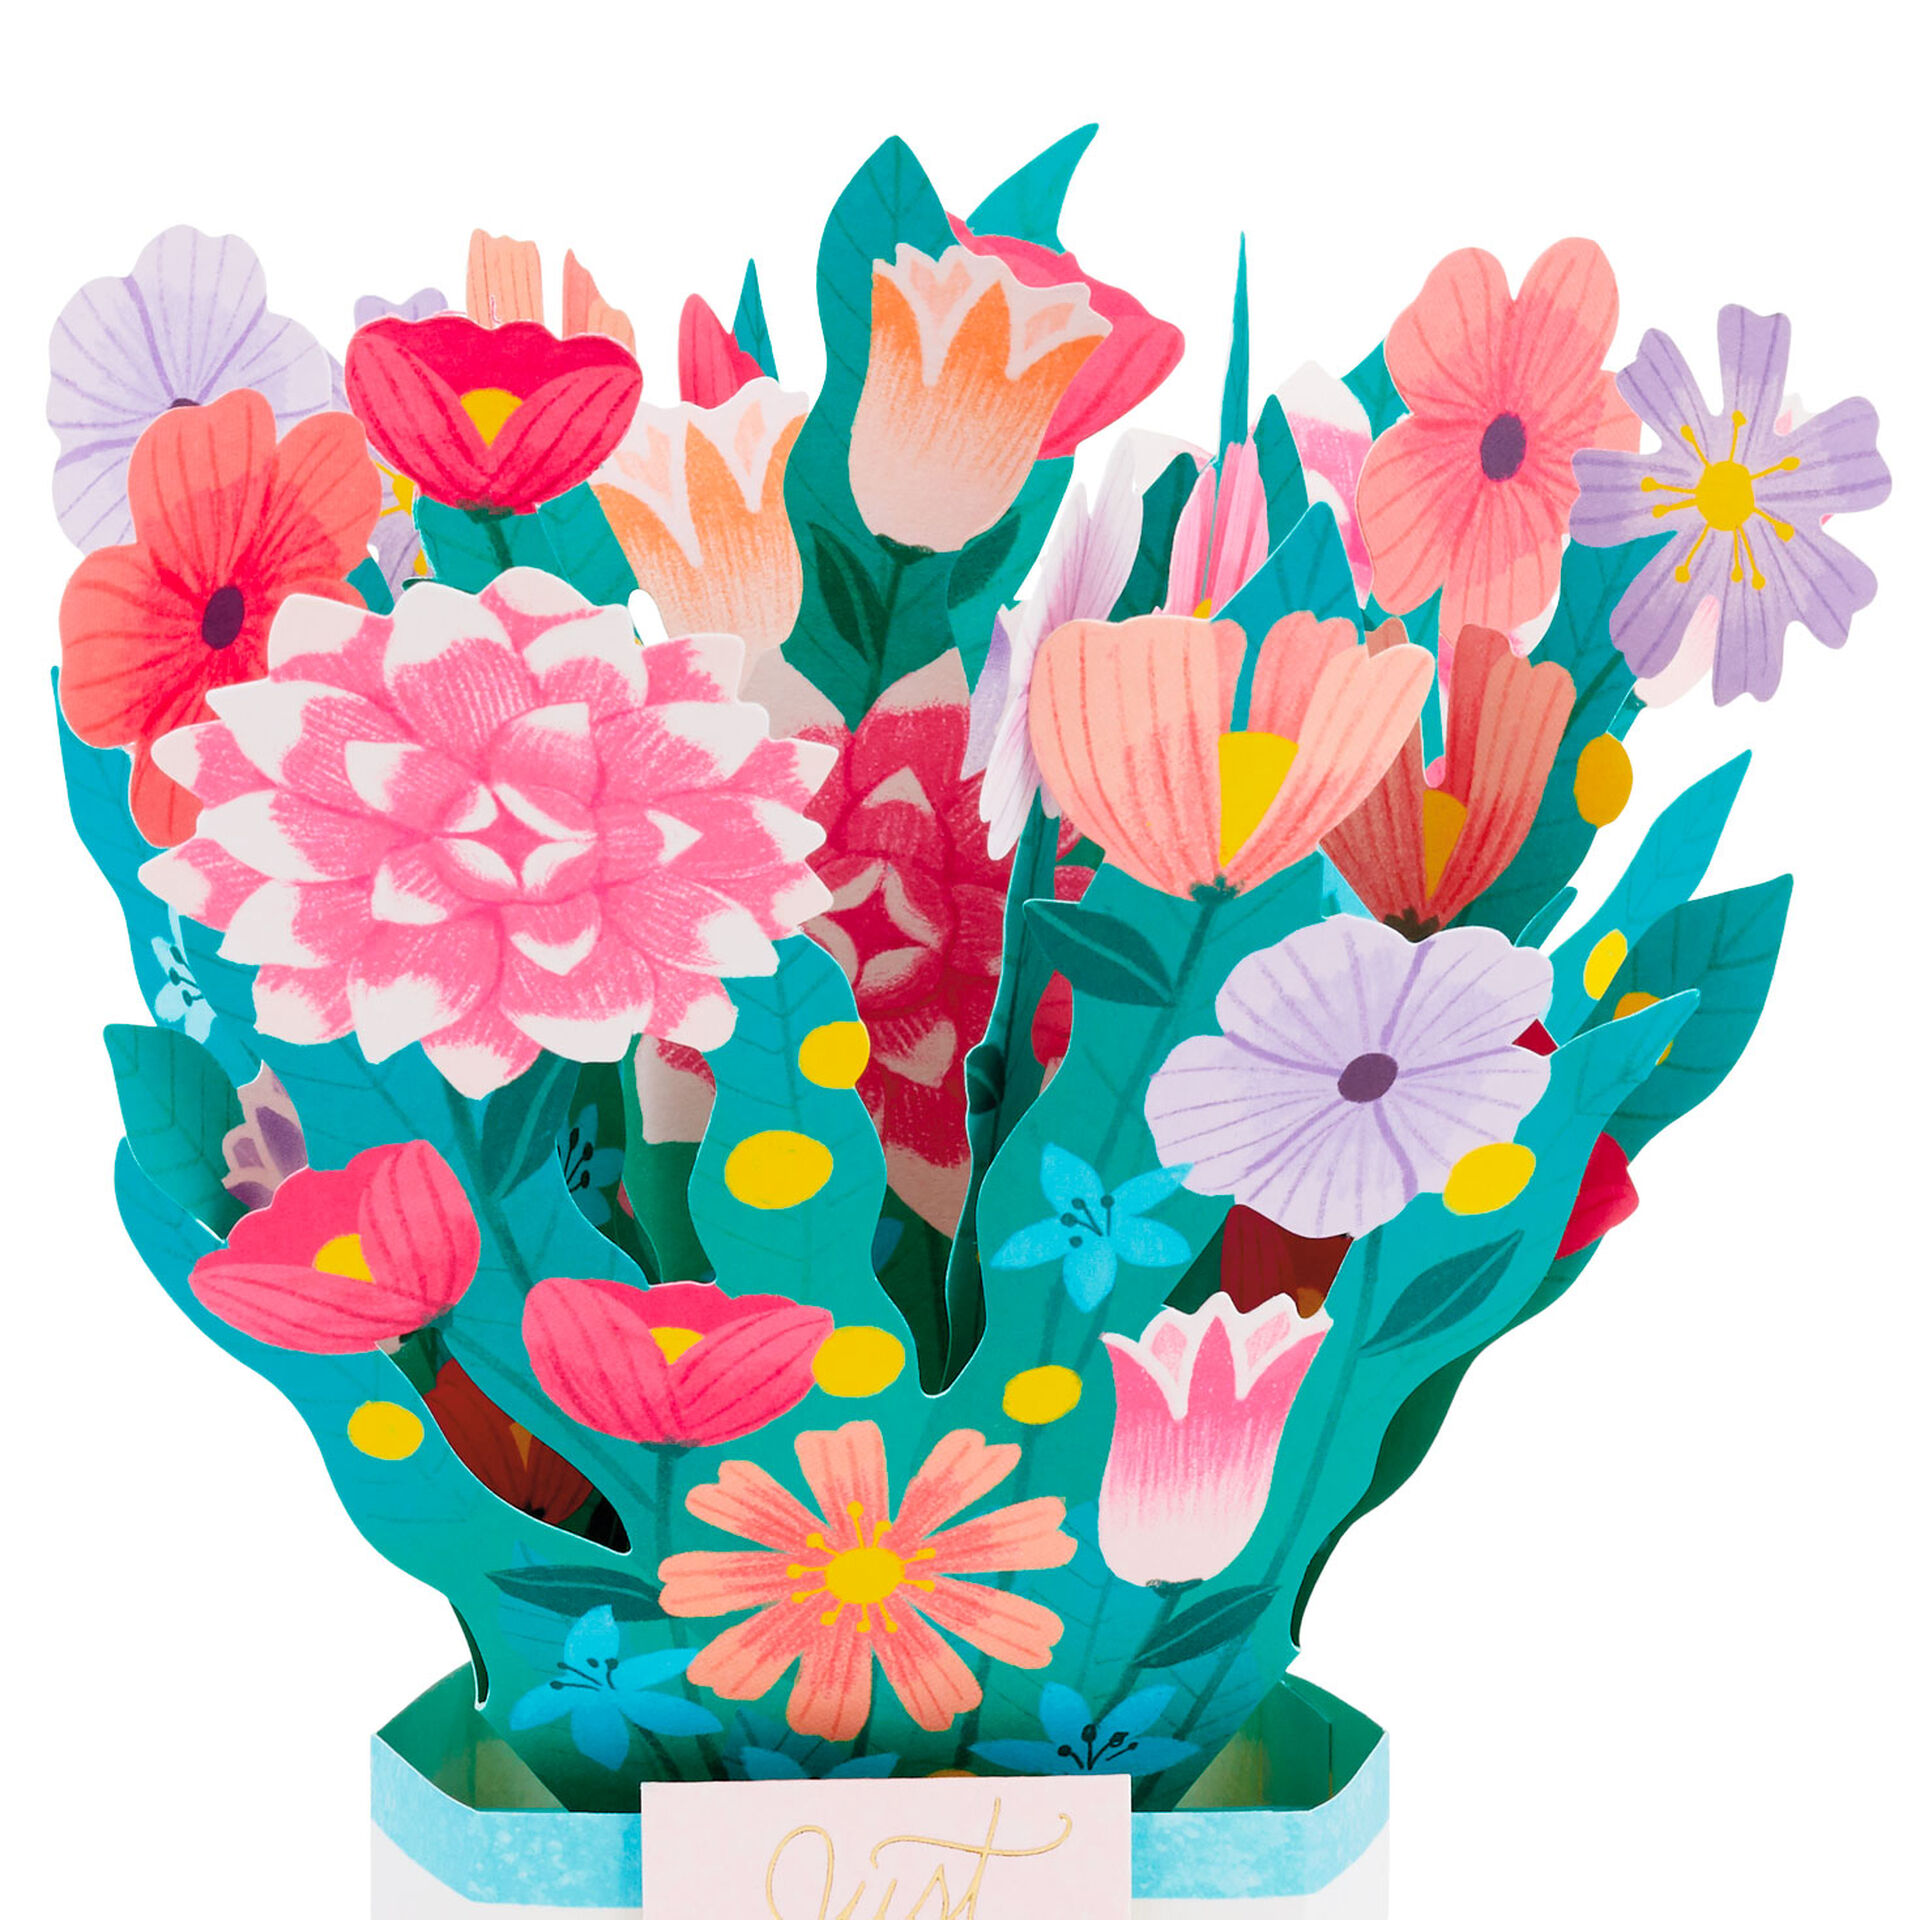 Colorful-Flowers-Just-For-You-3D-PopUp-Card_799WDR1206_03